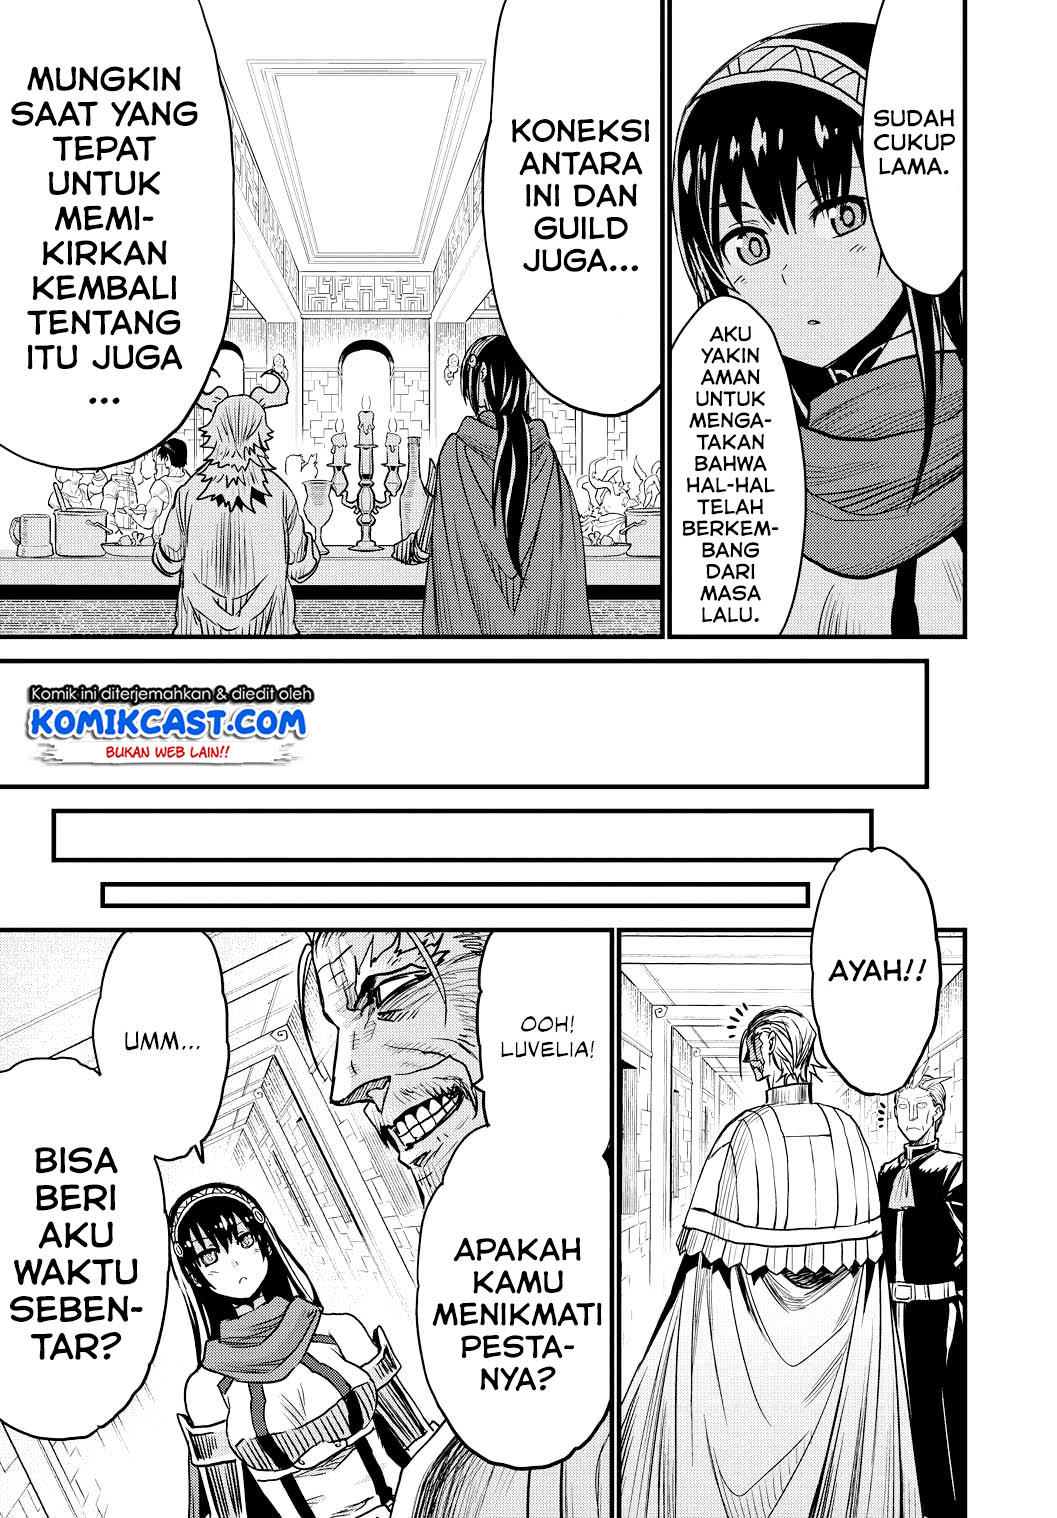 Peter Grill to Kenja no Jikan Chapter 24